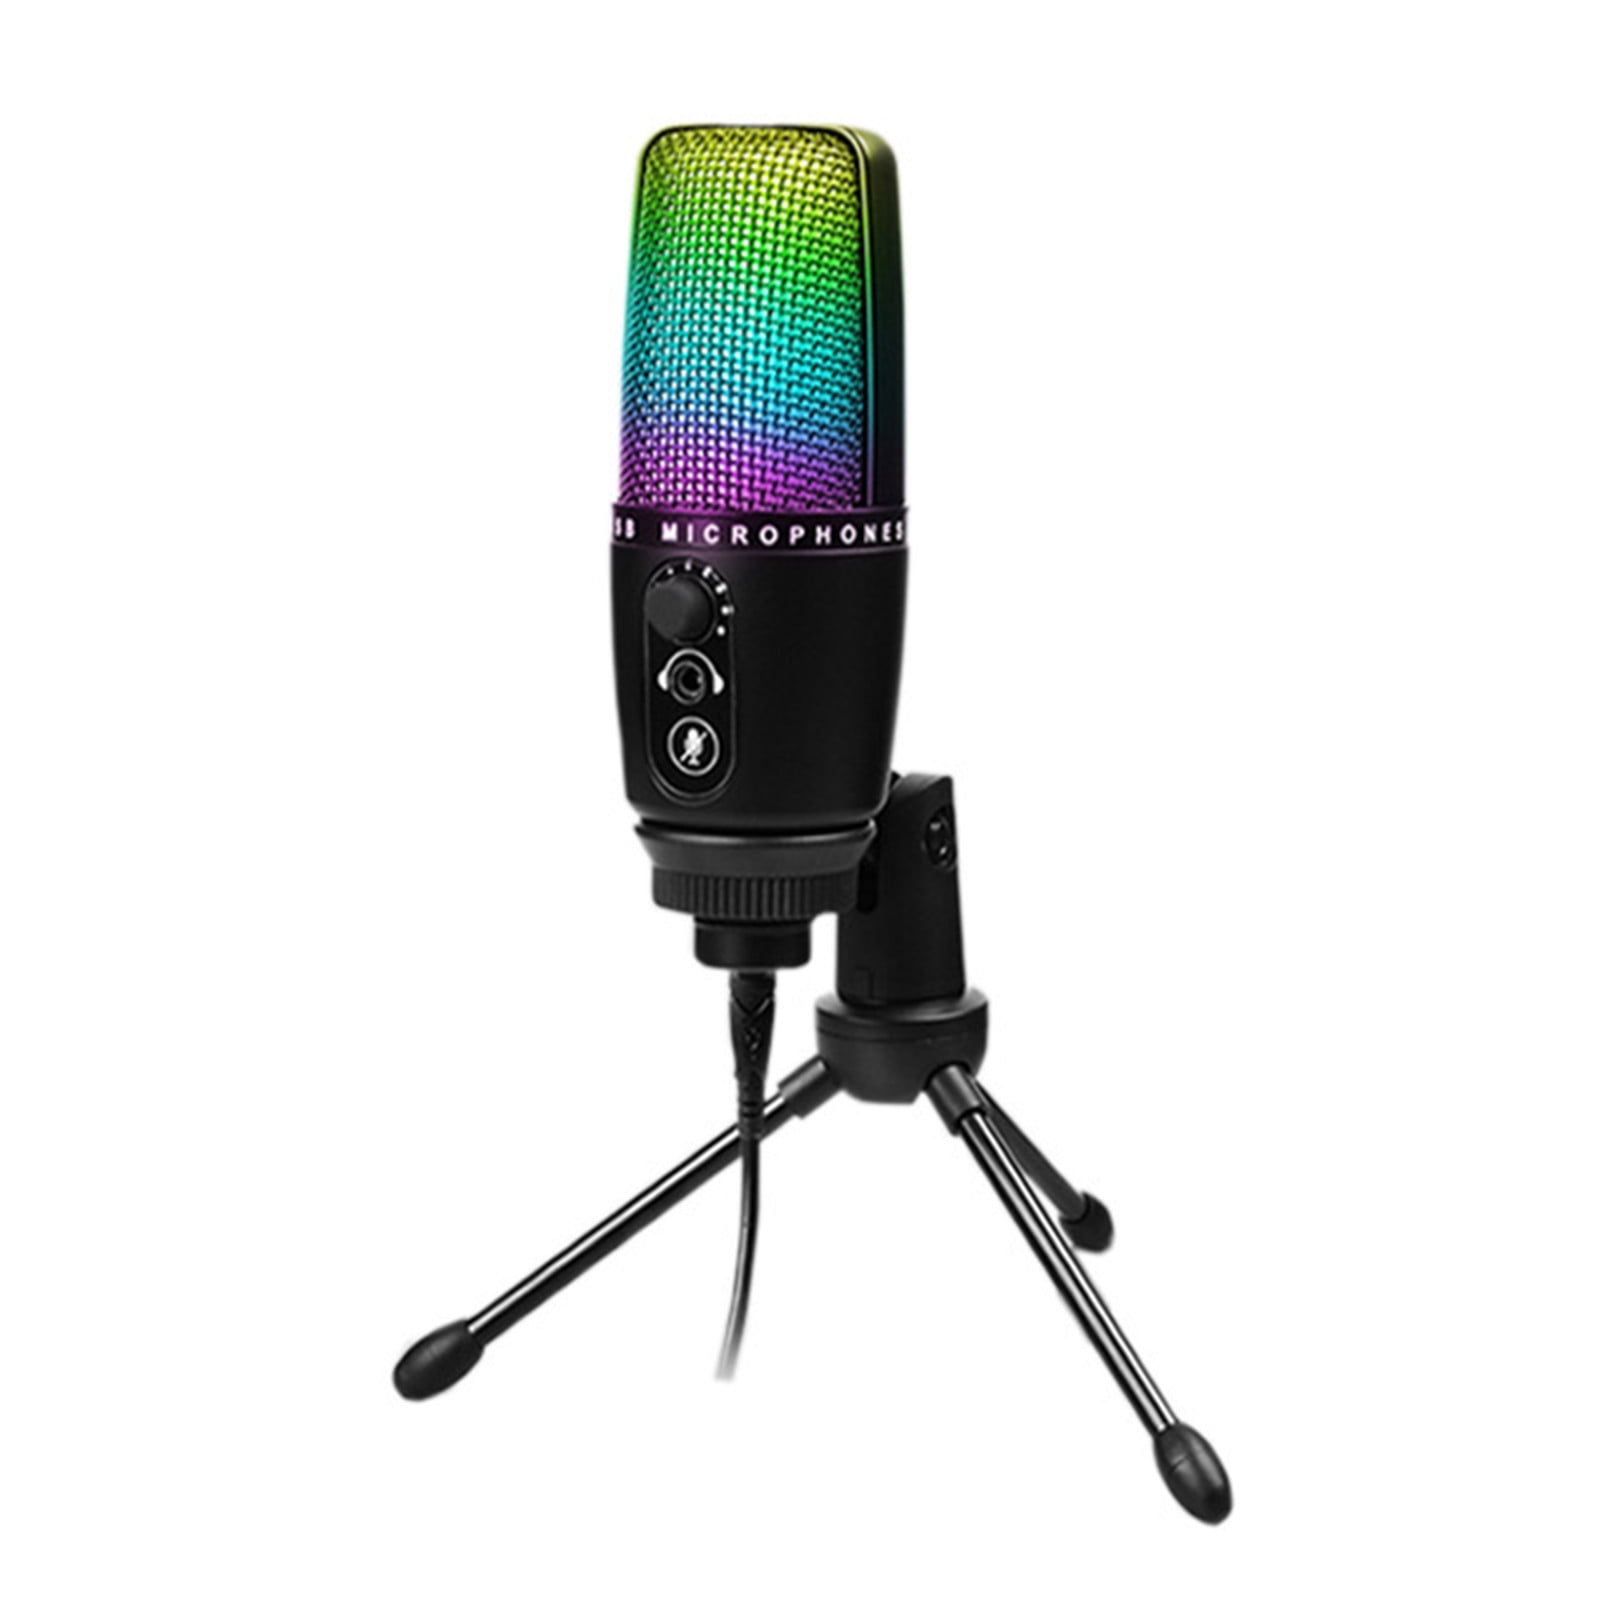 Fugtighed Fjerde identifikation RKSTN USB Microphone Desktop, Podcast Microphone, PC Gaming Mic,  Perceptible Noise Reduction RGB Lighting,for Recording Vocals Voice Overs -  Walmart.com